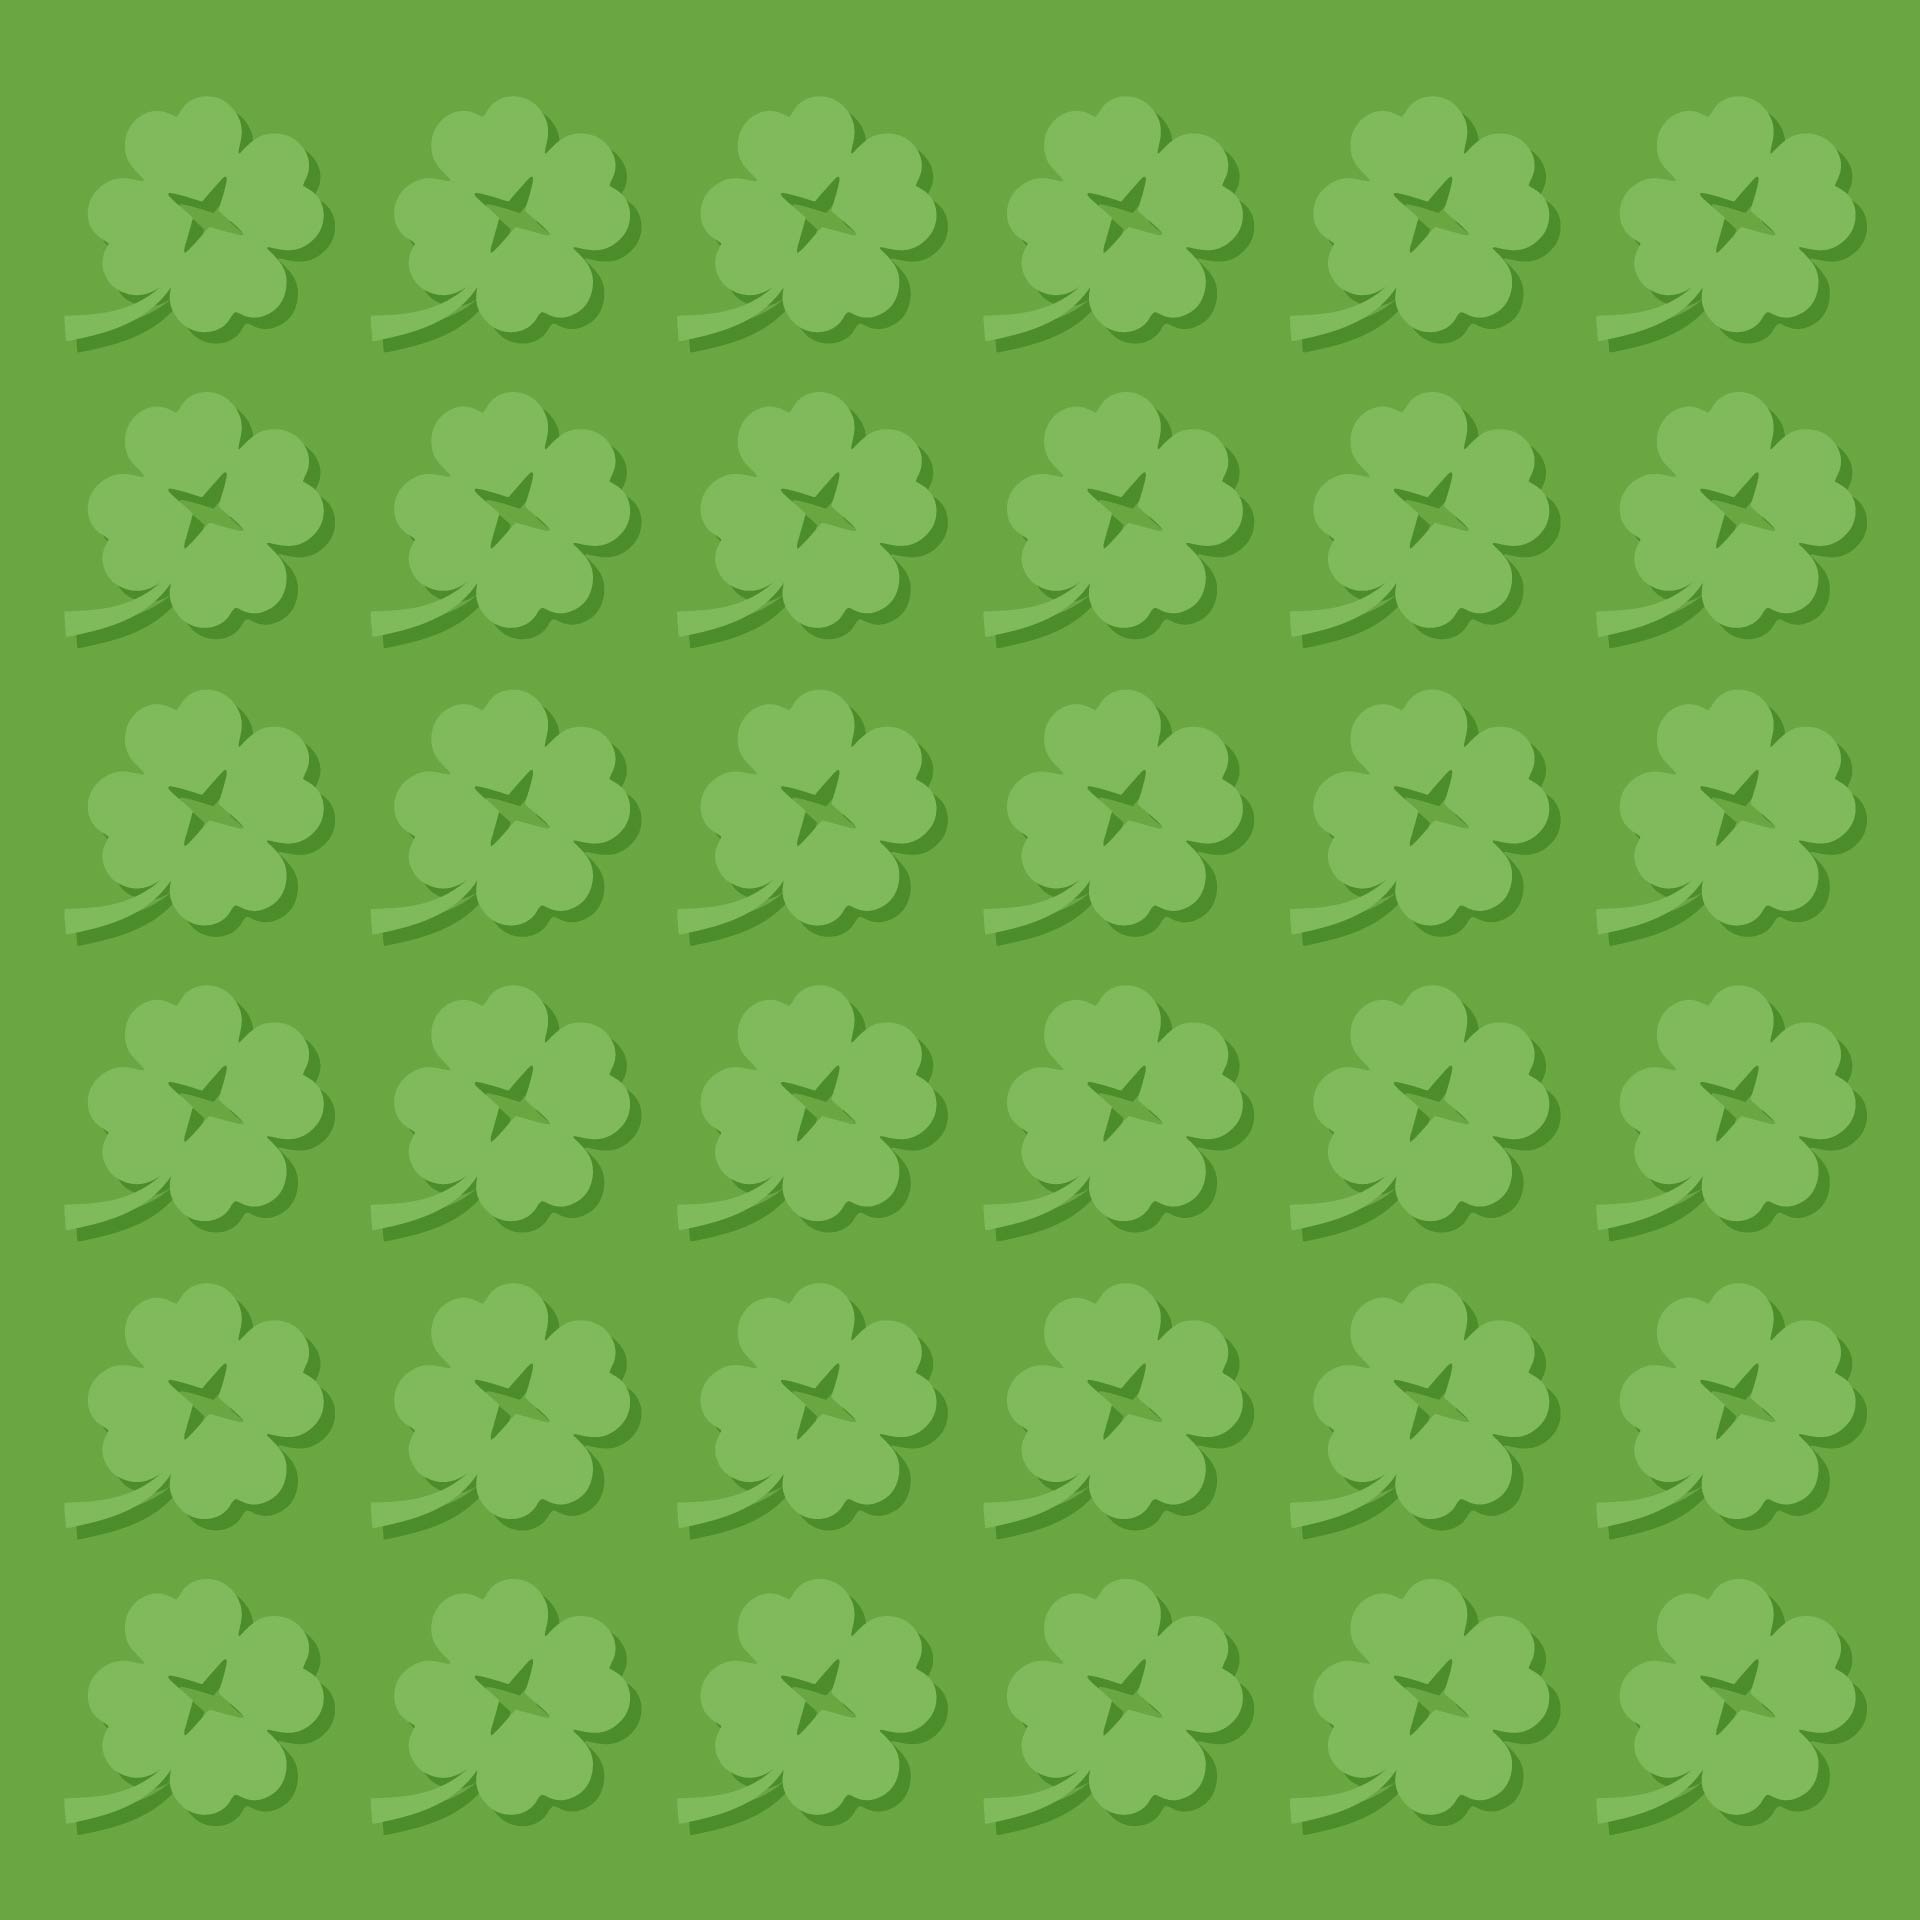 5-best-images-of-four-leaf-shamrock-template-printable-st-patrick-s-day-clover-template-4